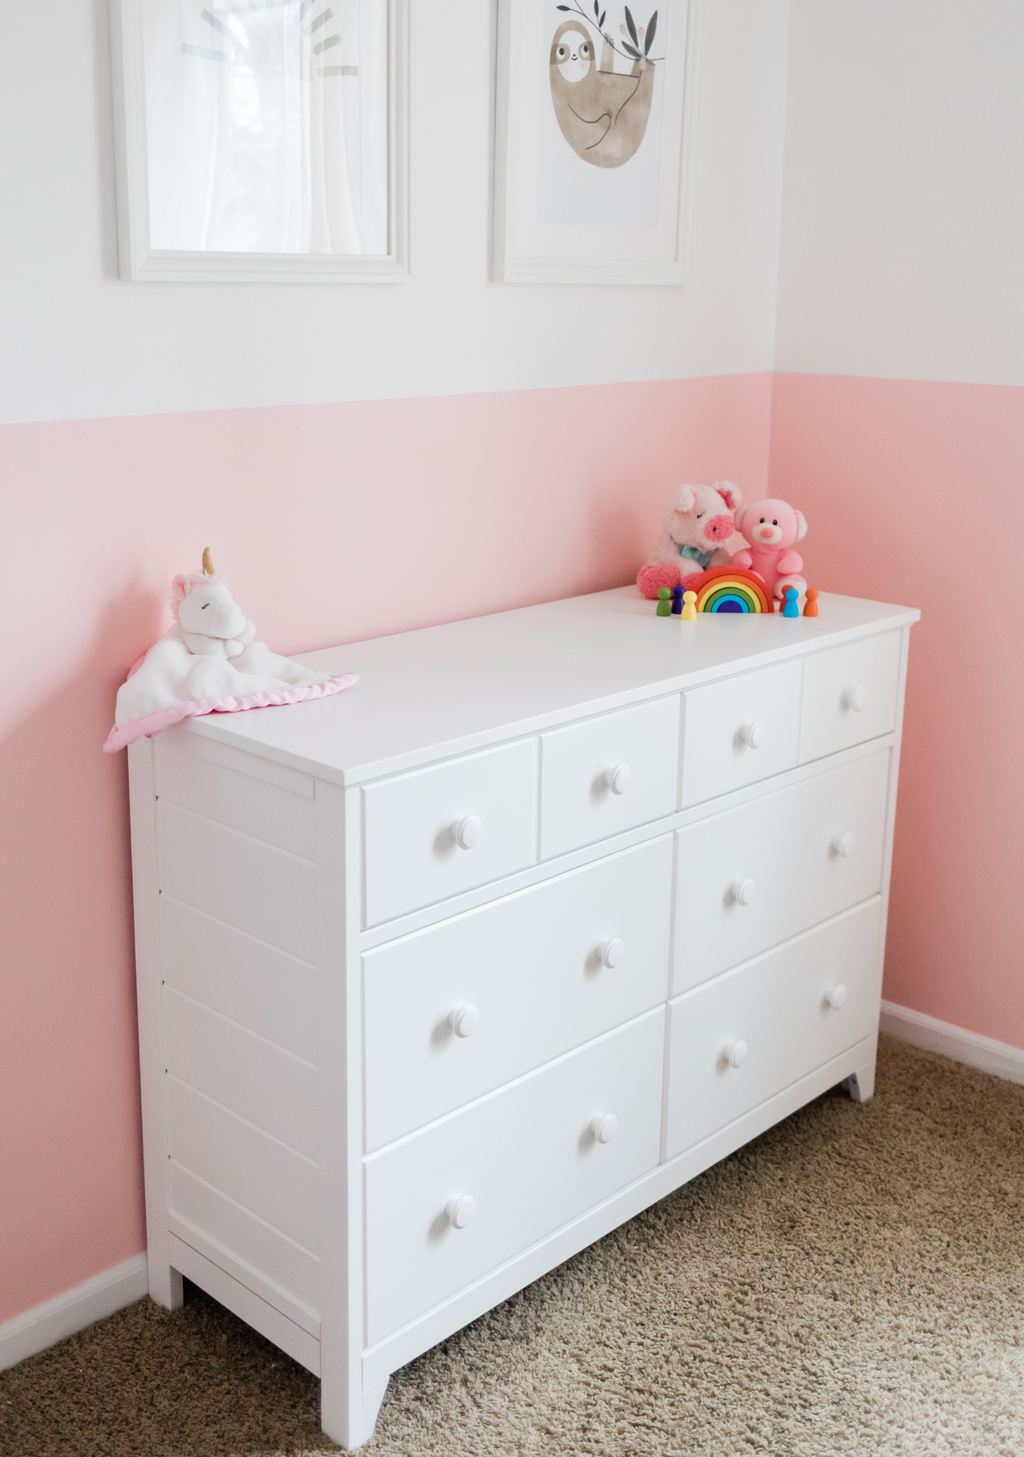 Storkcraft: Creating A Modern Nursery That Grows With Your Child